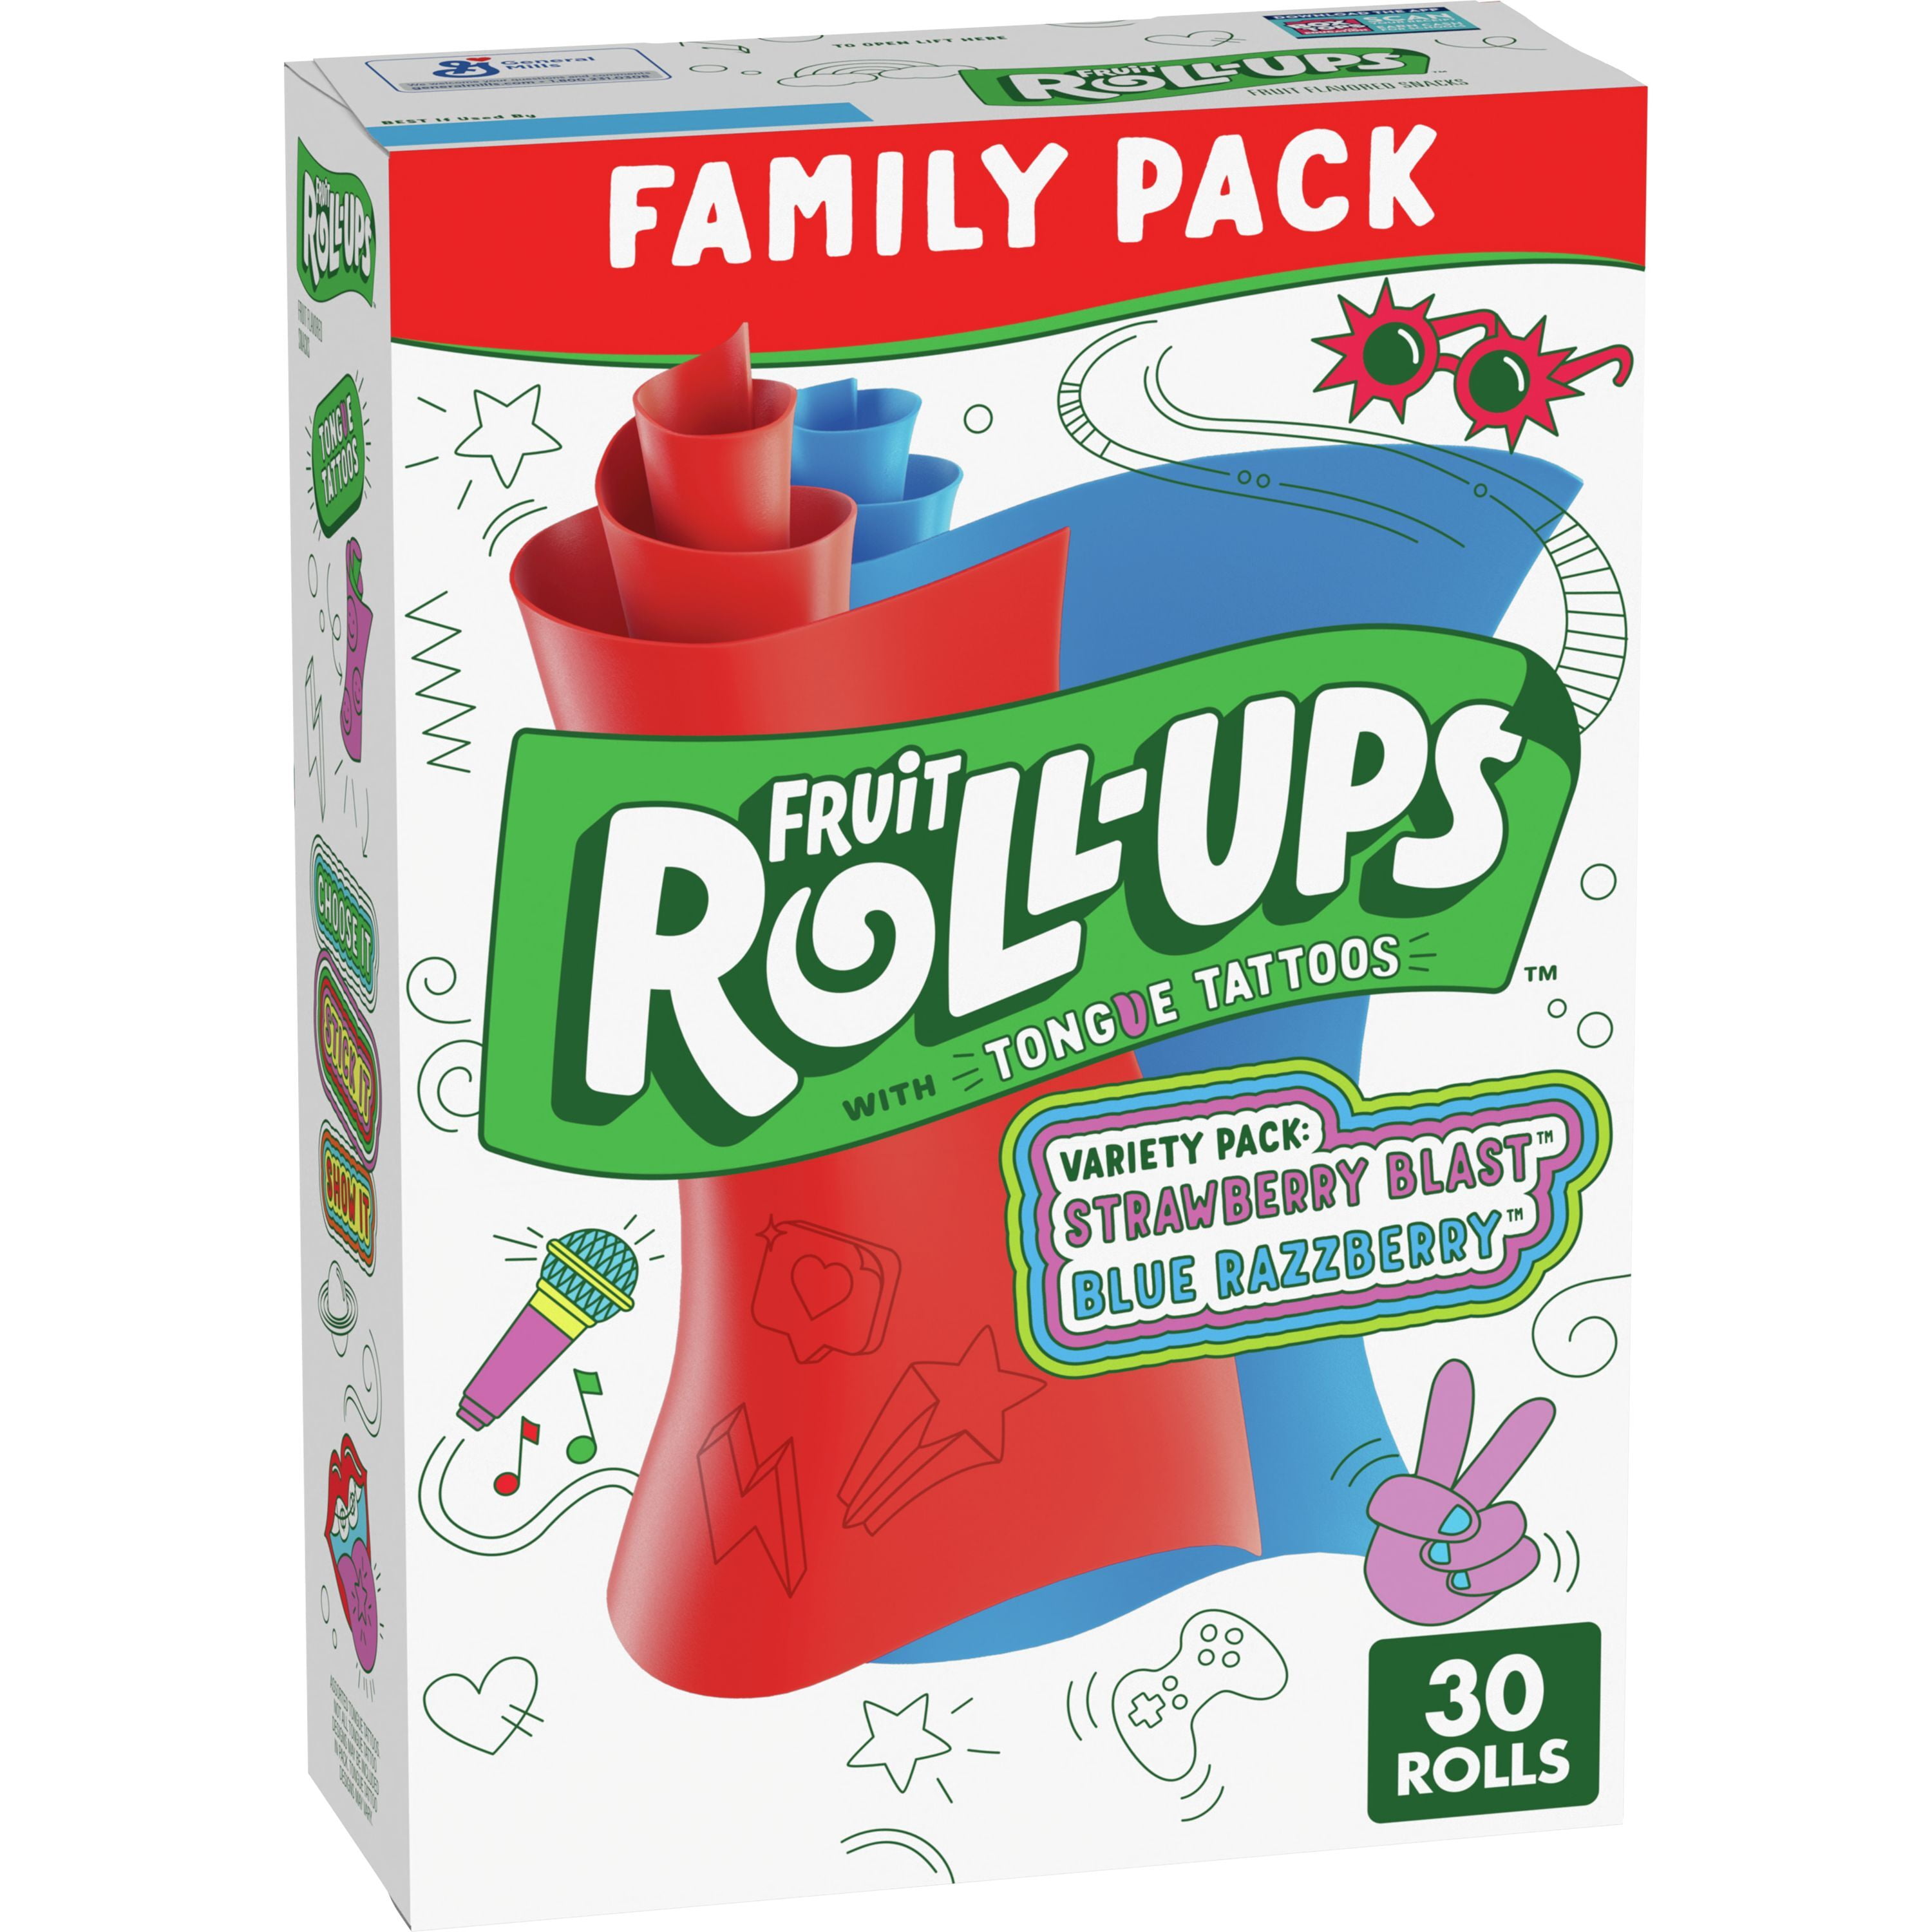 Who remembers fruit rollup tongue tattoos   First We Feast  First We  Feast  Original audio  Facebook